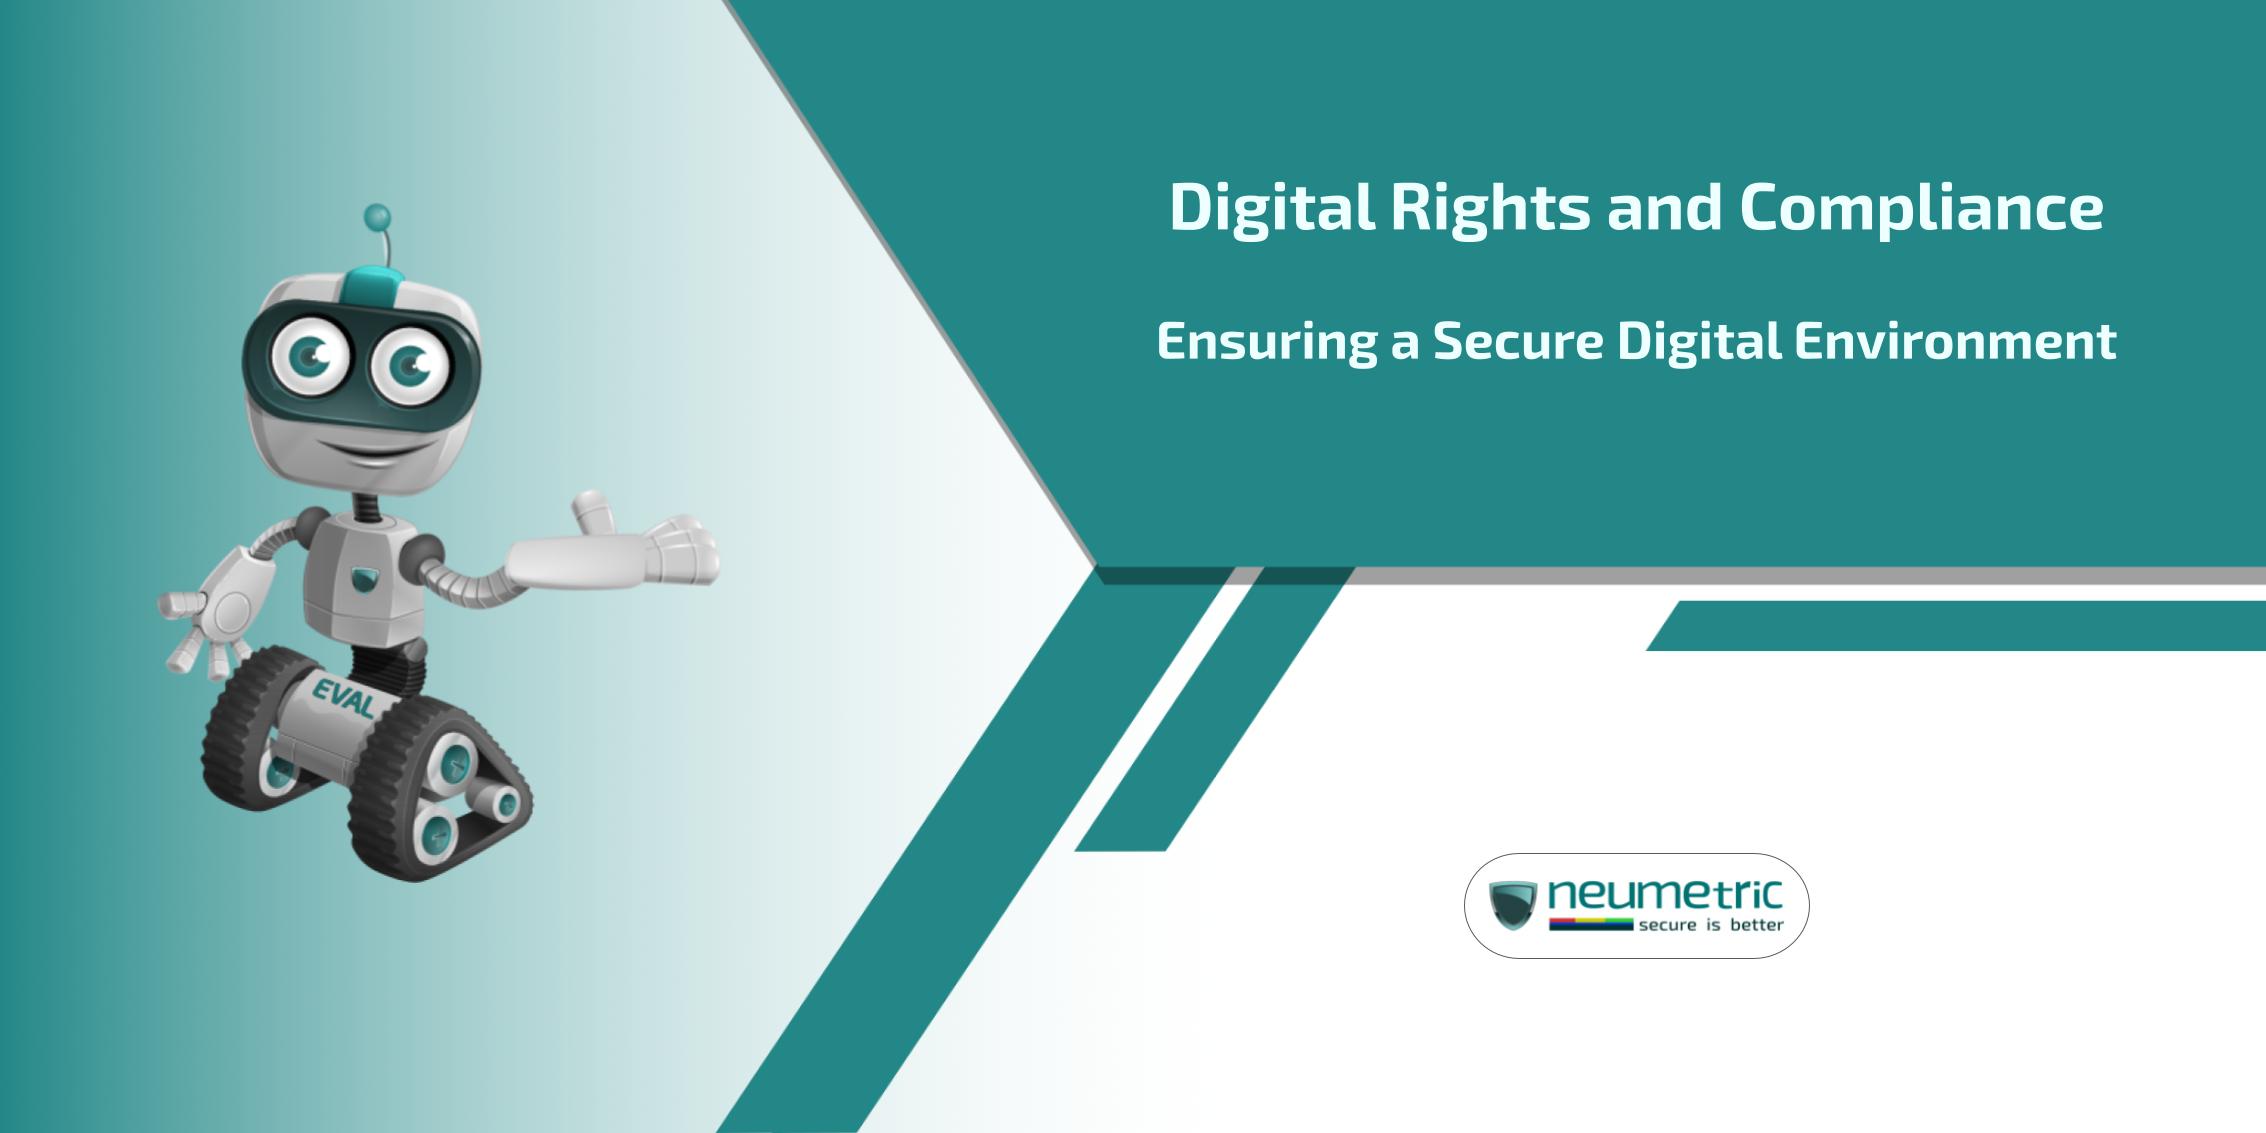 Digital Rights and Compliance: Ensuring a Secure Digital Environment